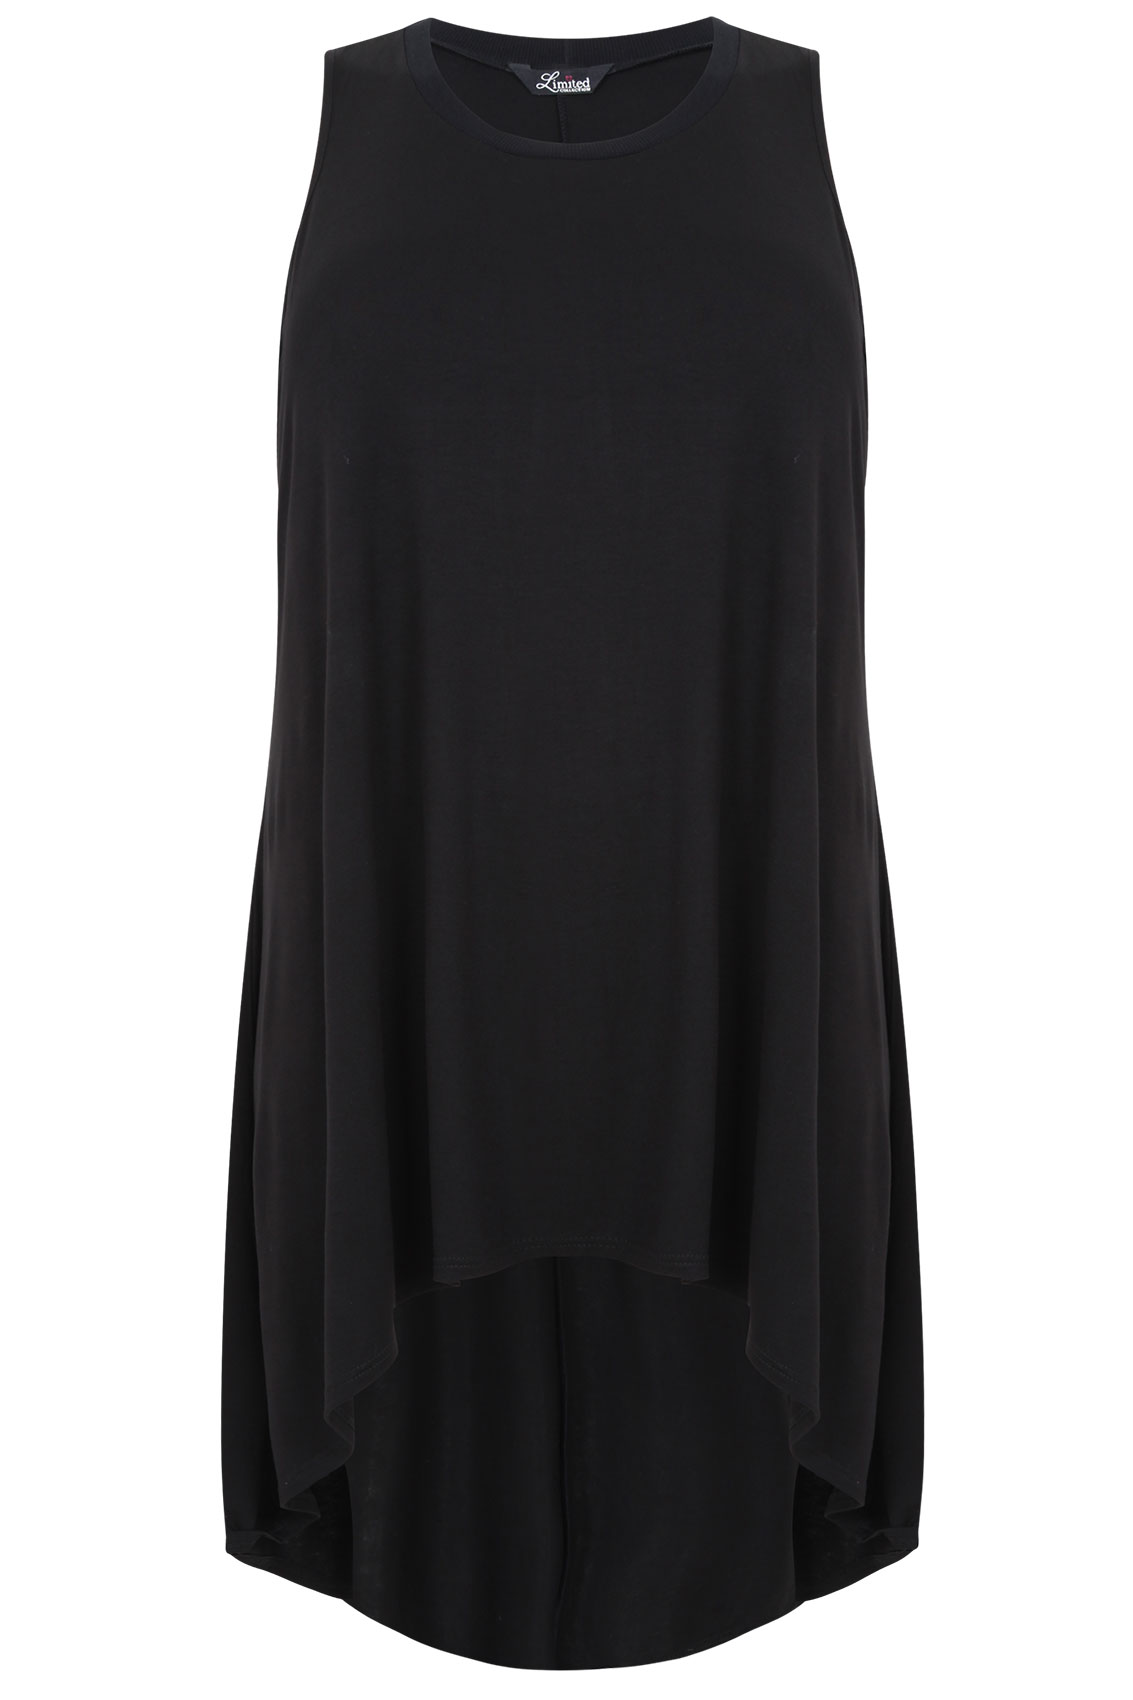 Black Longline Jersey Top With Extreme Dipped Back Hem Plus size 16,18 ...